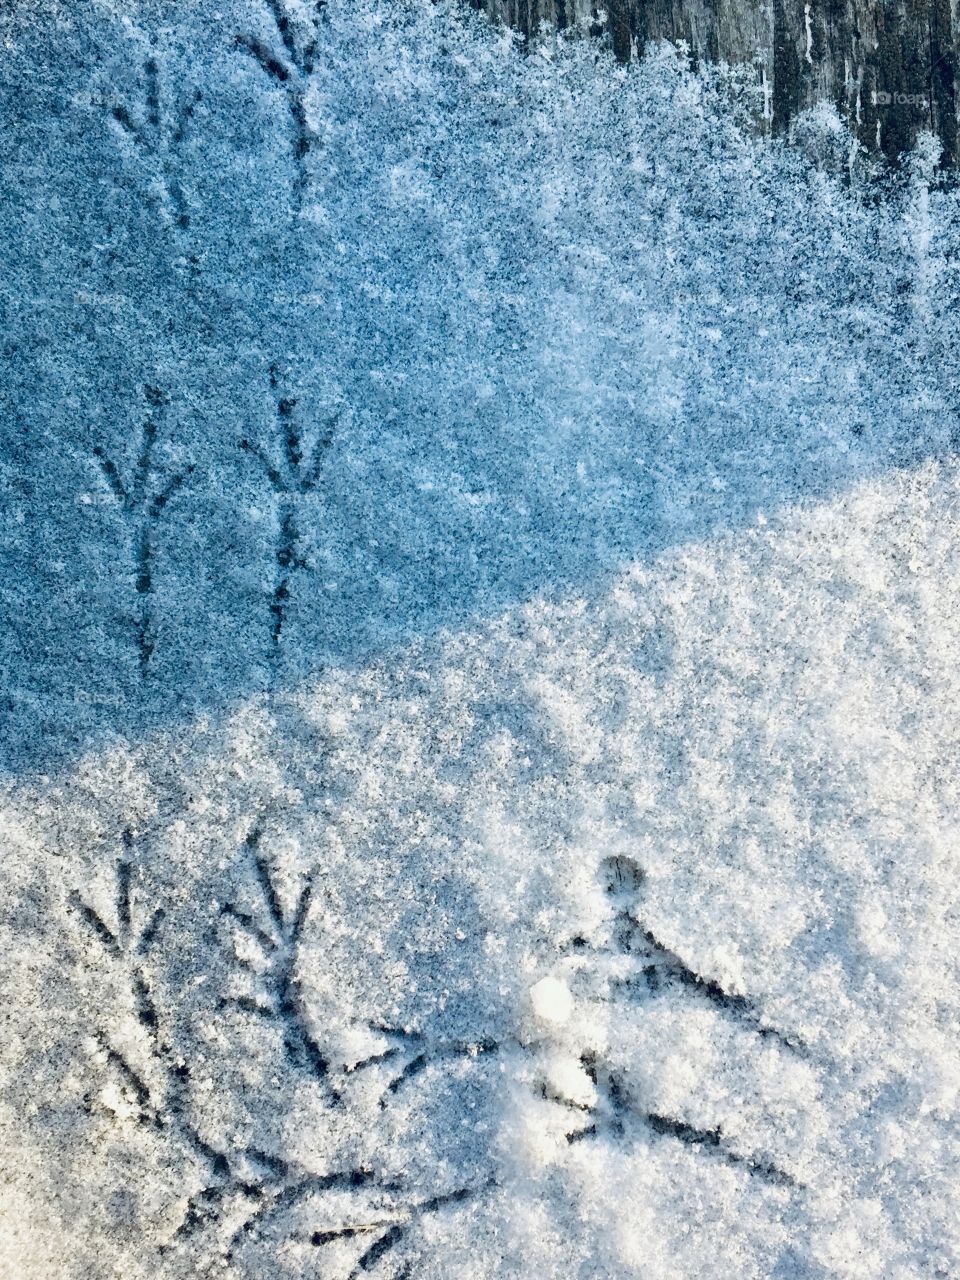 Little bird tracks on a snow-covered wooden surface 